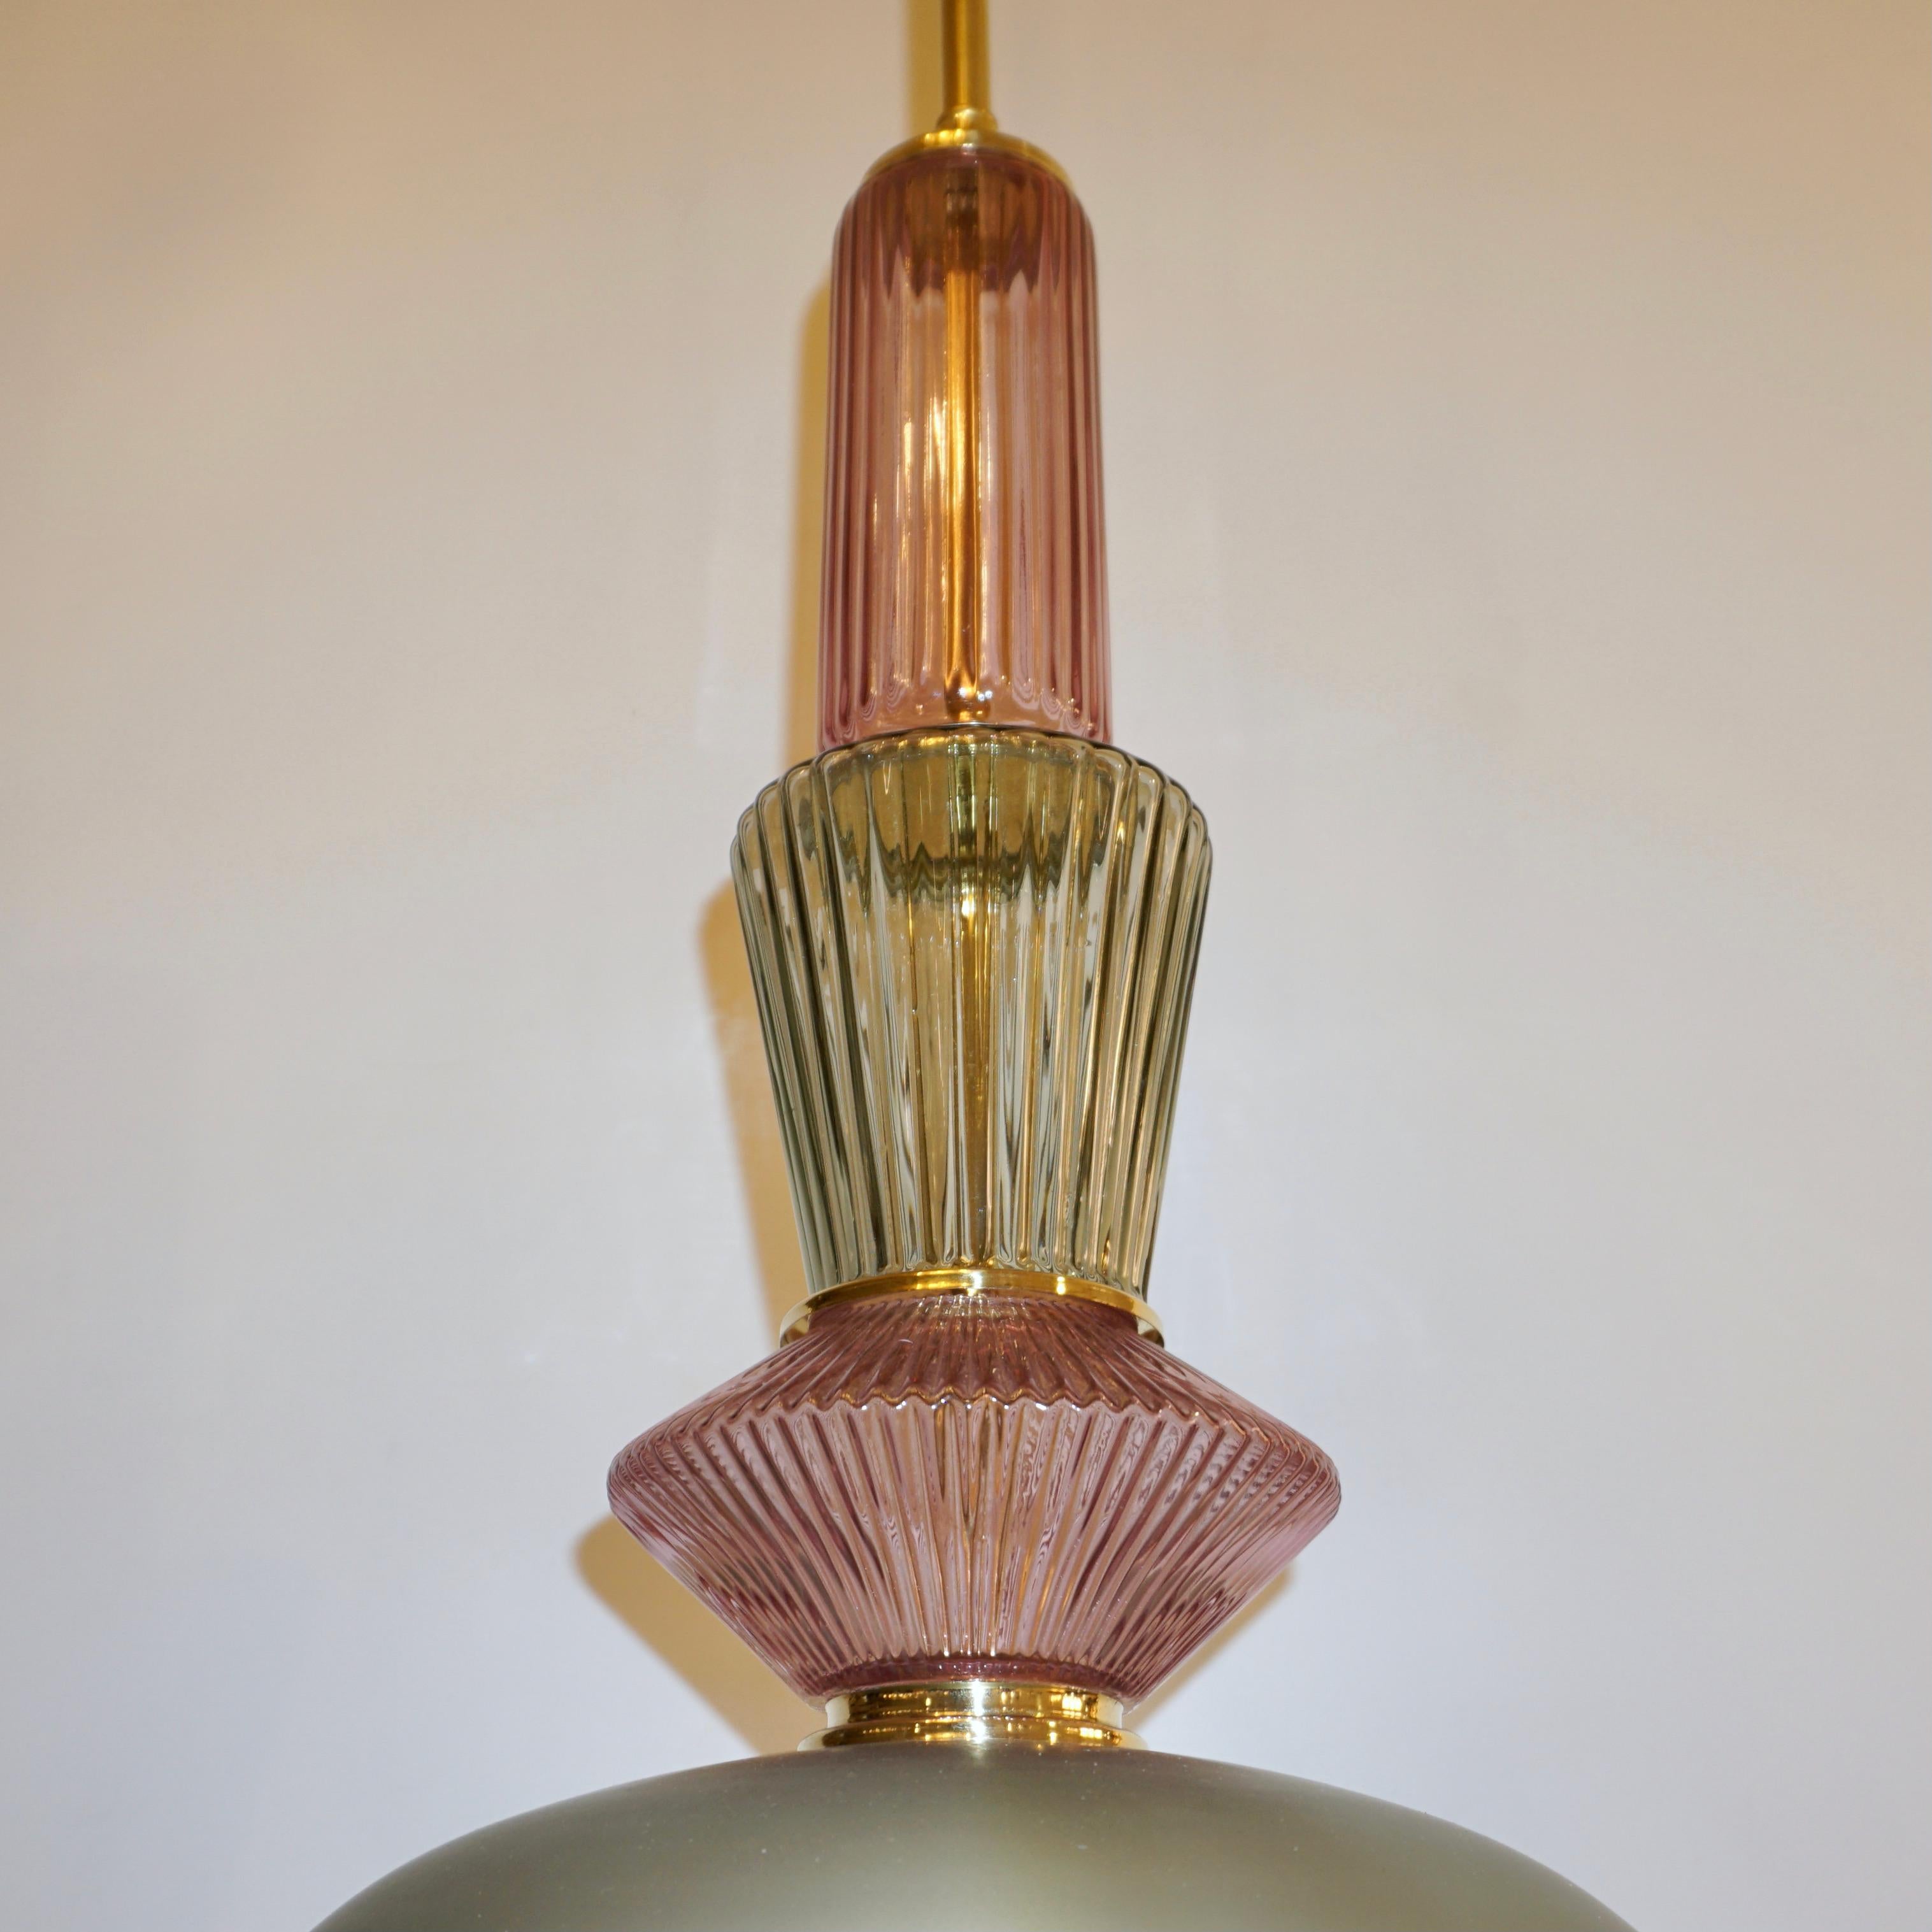 Fun and elegant Italian contemporary custom made pendant chandelier, entirely handcrafted, of organic modern design consisting of a succession of elements: handcut jewel like reeded Murano glass components in lilac lavender color and light leaf